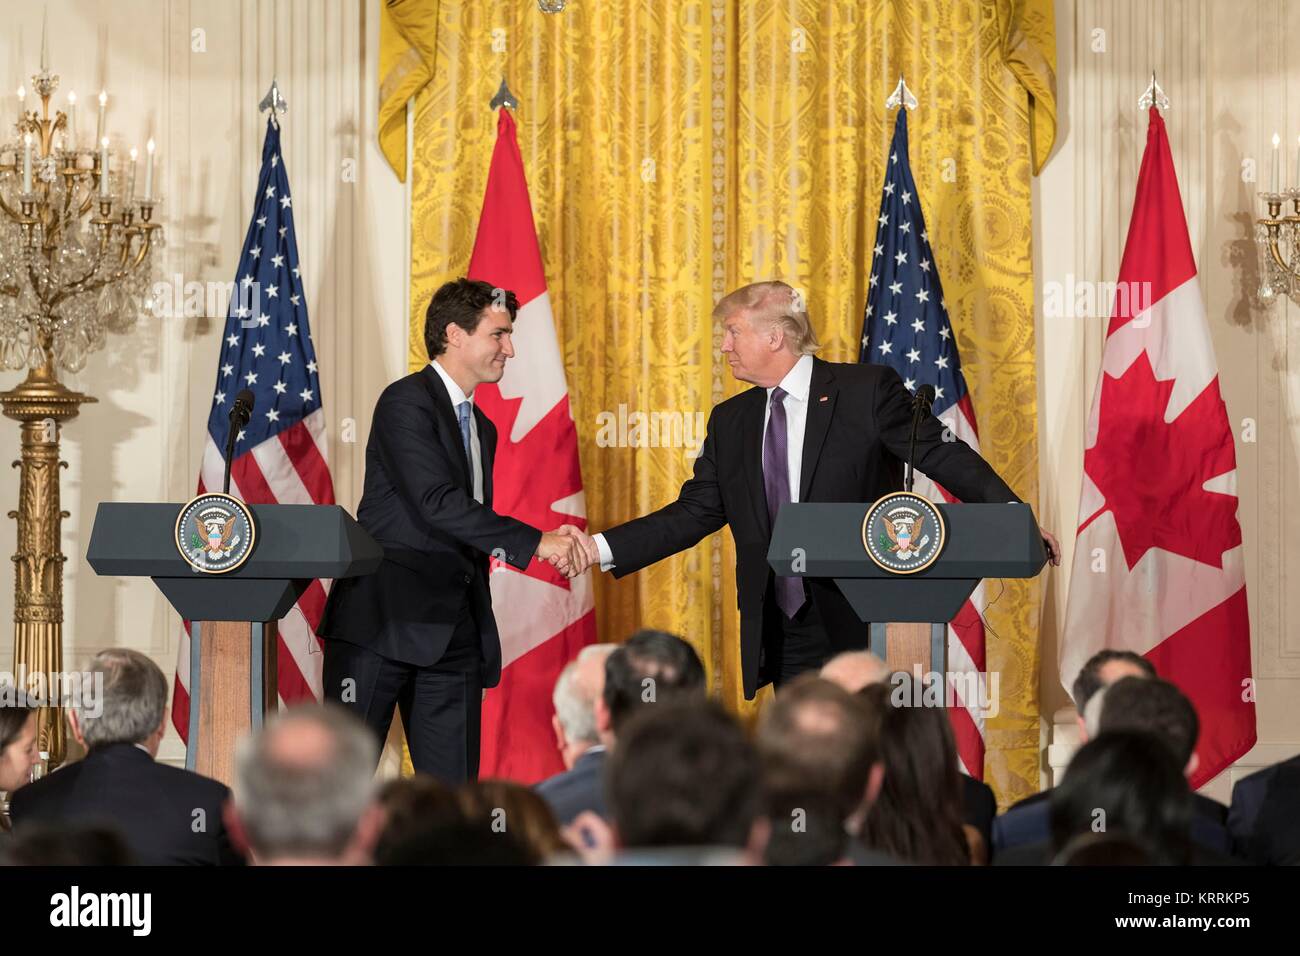 Canadian Prime Minister Justin Trudeau (left) and U.S. President Donald Trump hold a joint press conference at the White House East Room February 13, 2017 in Washington, DC. Stock Photo